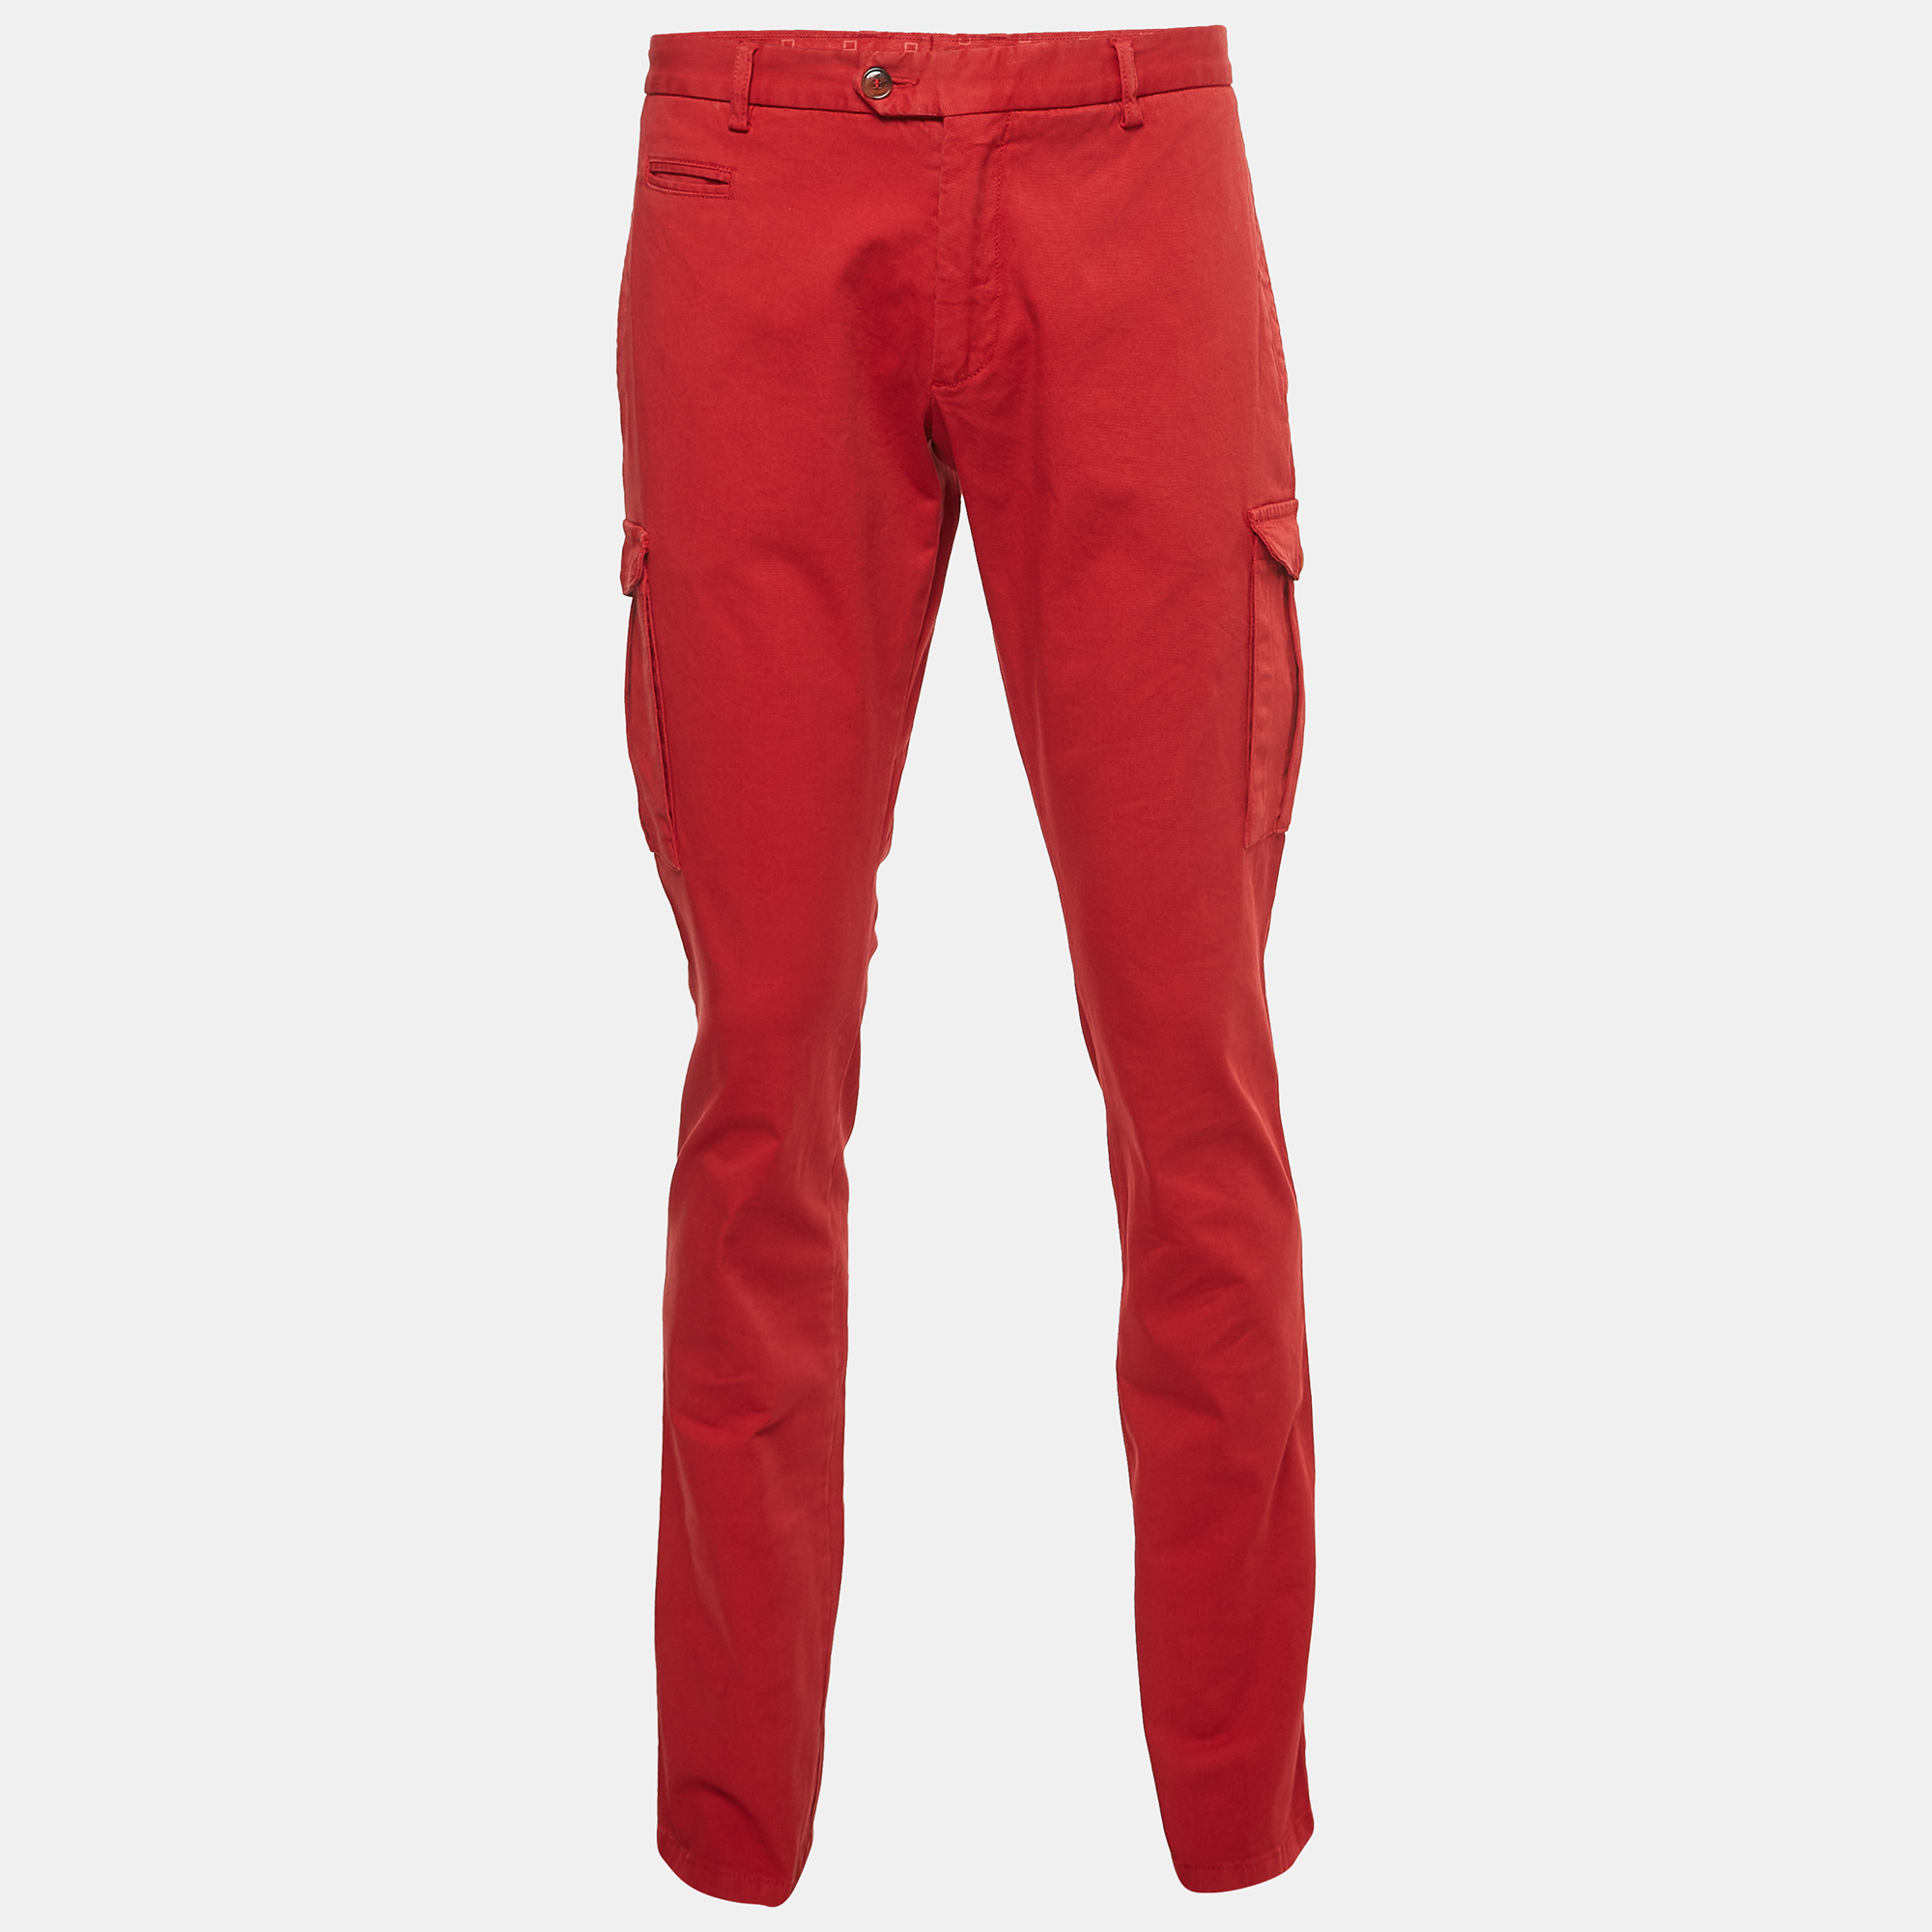 Etro Red Cotton Slim Fit Trousers XL